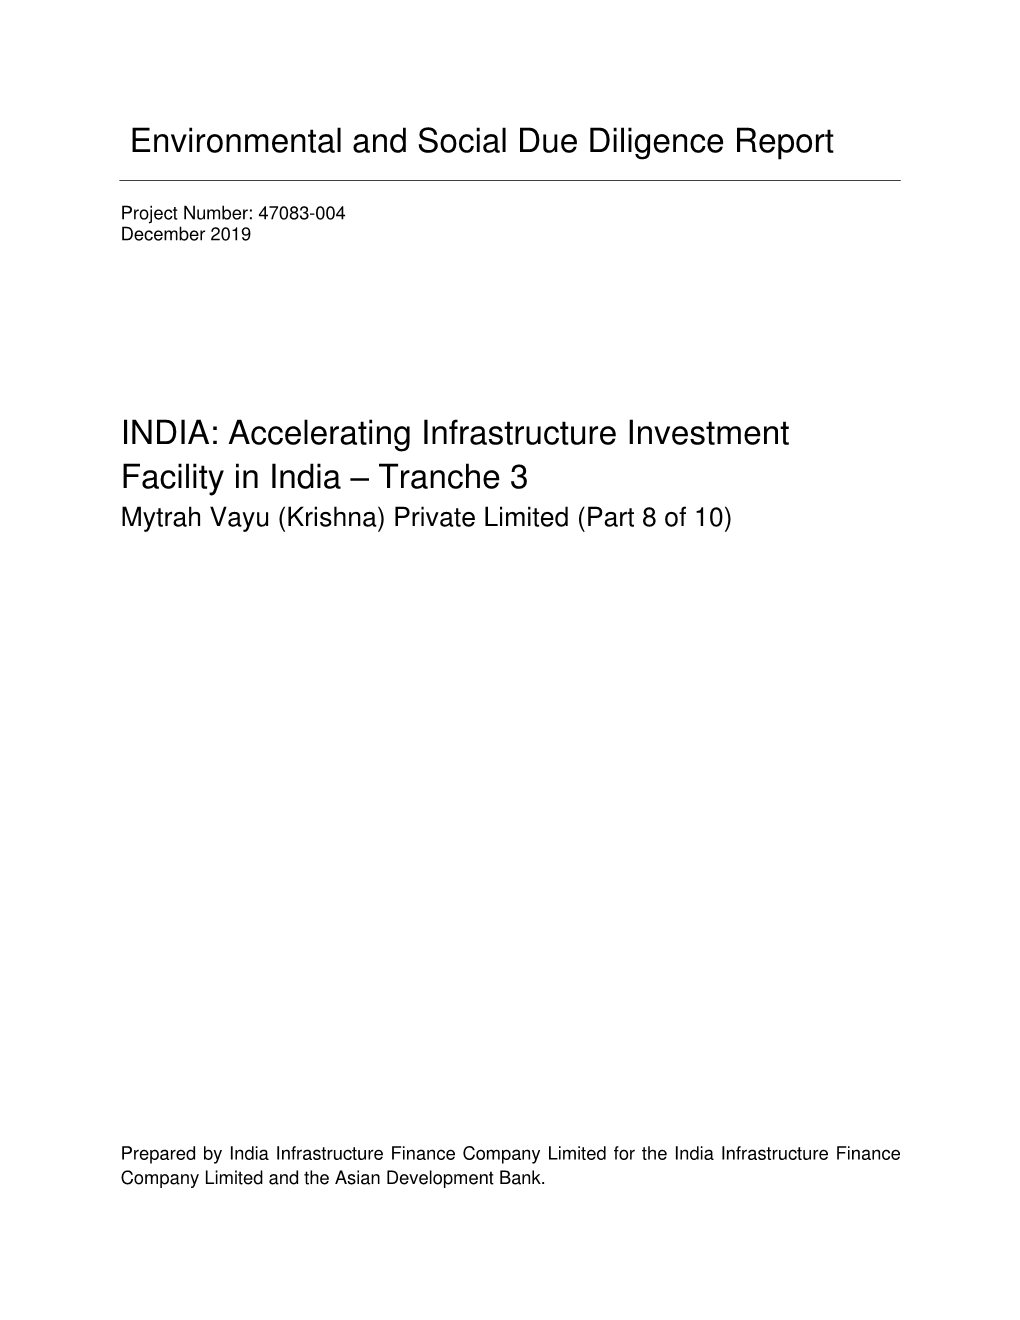 Environmental and Social Due Diligence Report INDIA